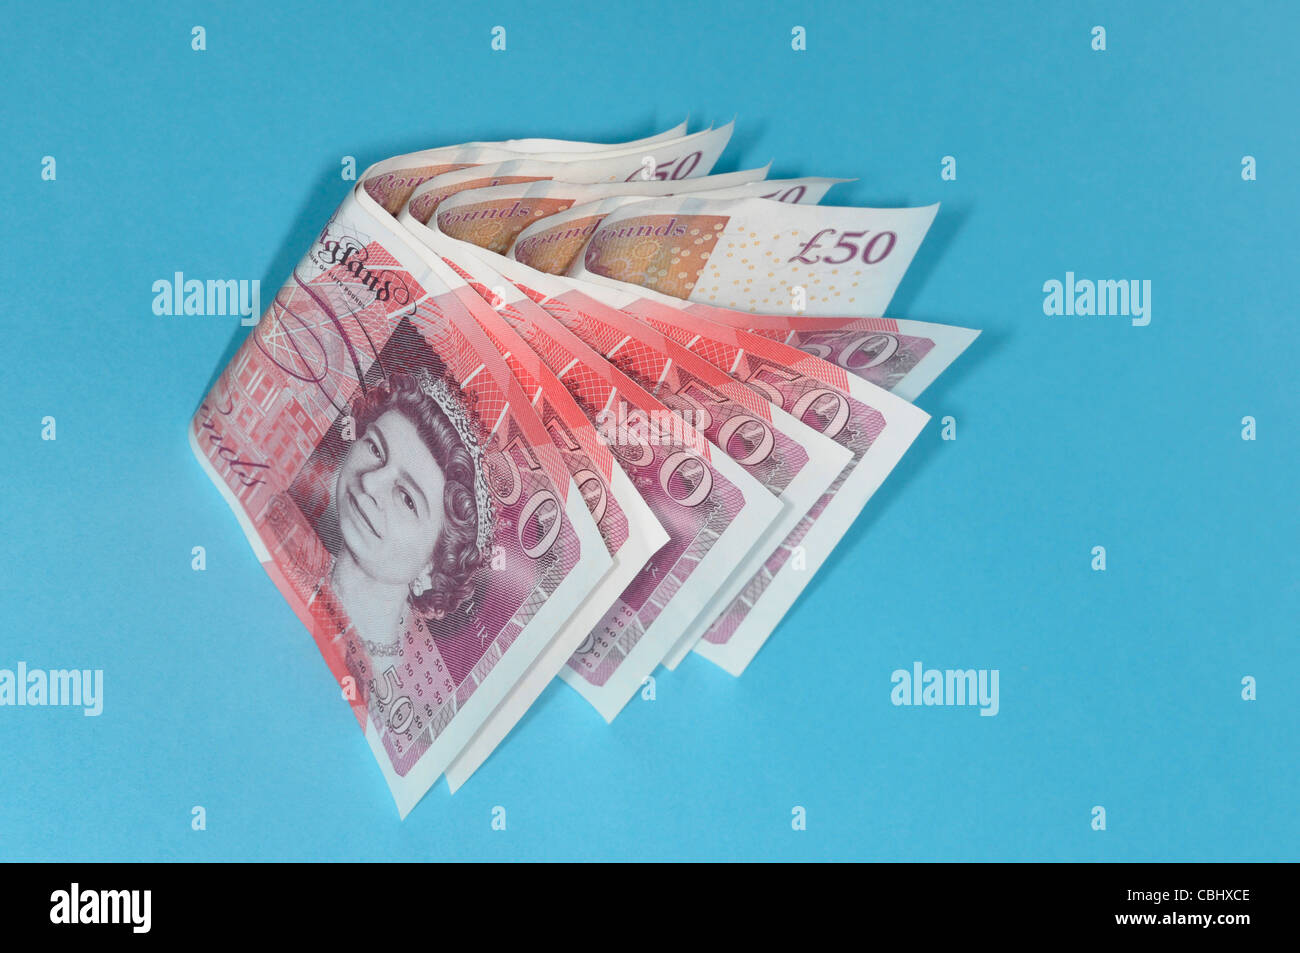 Debt Crisis. Savings and falling value of currencies. Chevron row of fifty pound bank notes as the debt crisis takes hold. Stock Photo